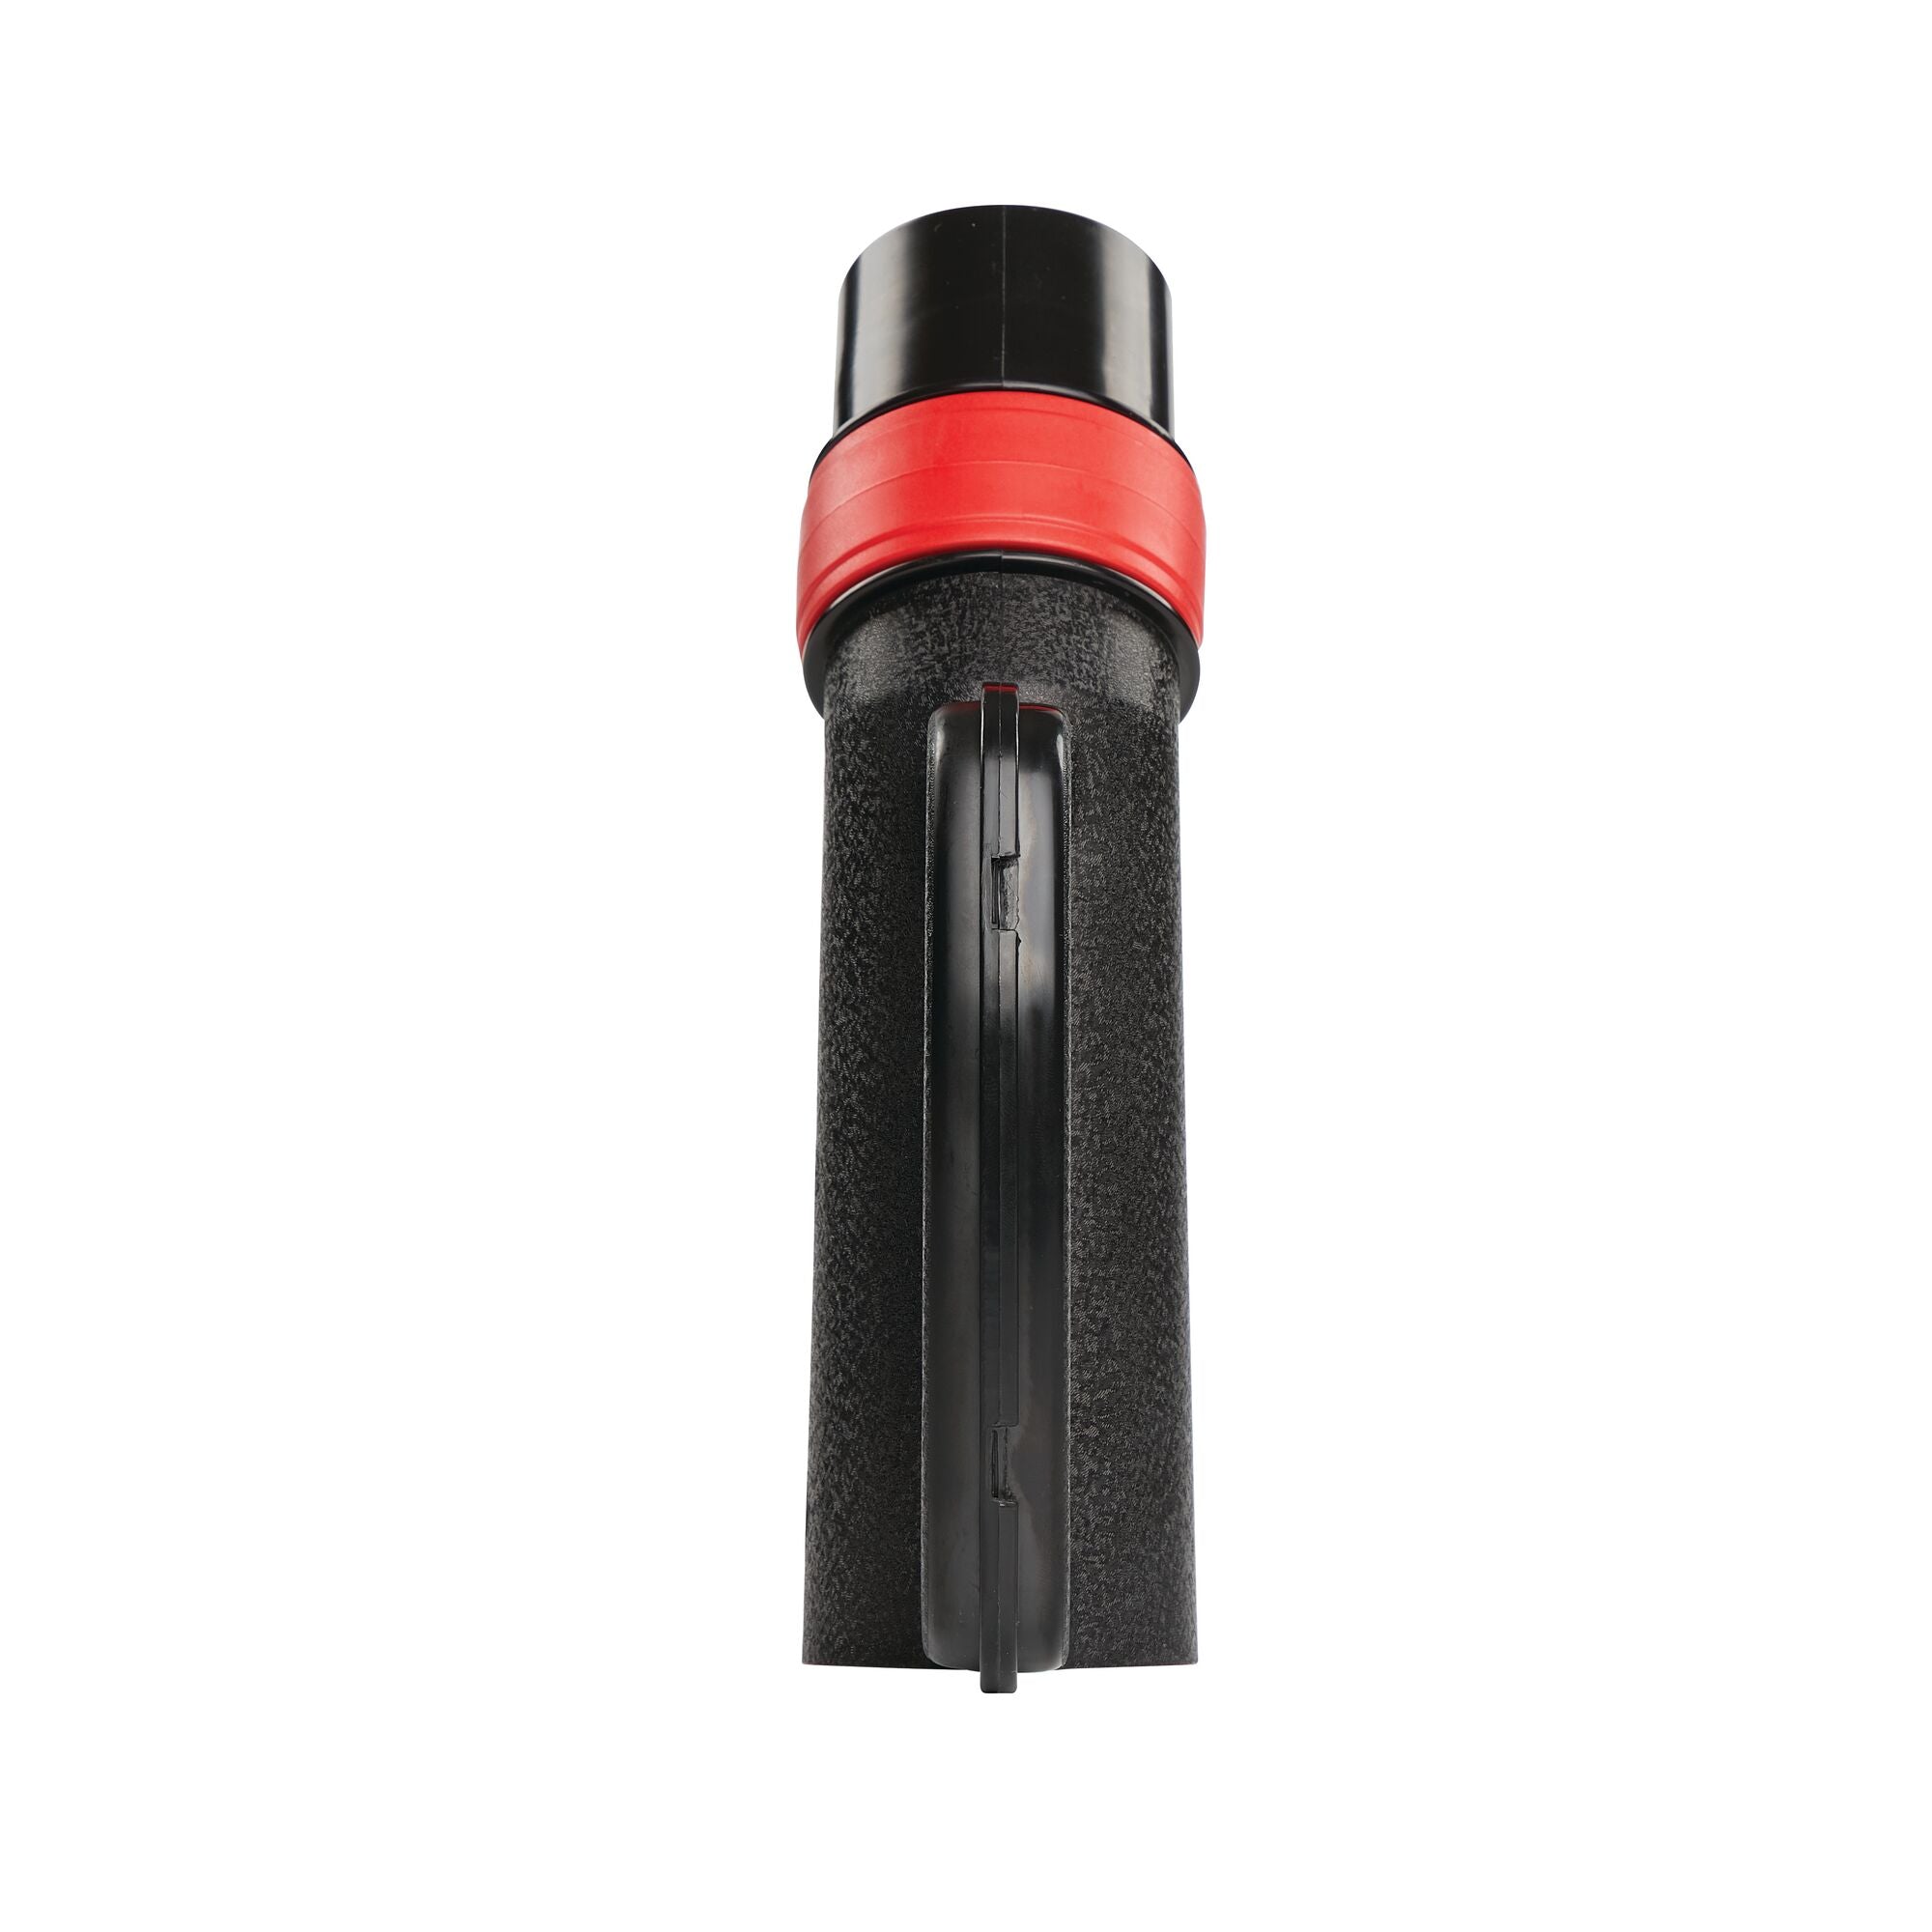 Backside of Two and a half inch Wet or Dry Vacuum Hose Grip Handle Attachment With Bleeder Valve.